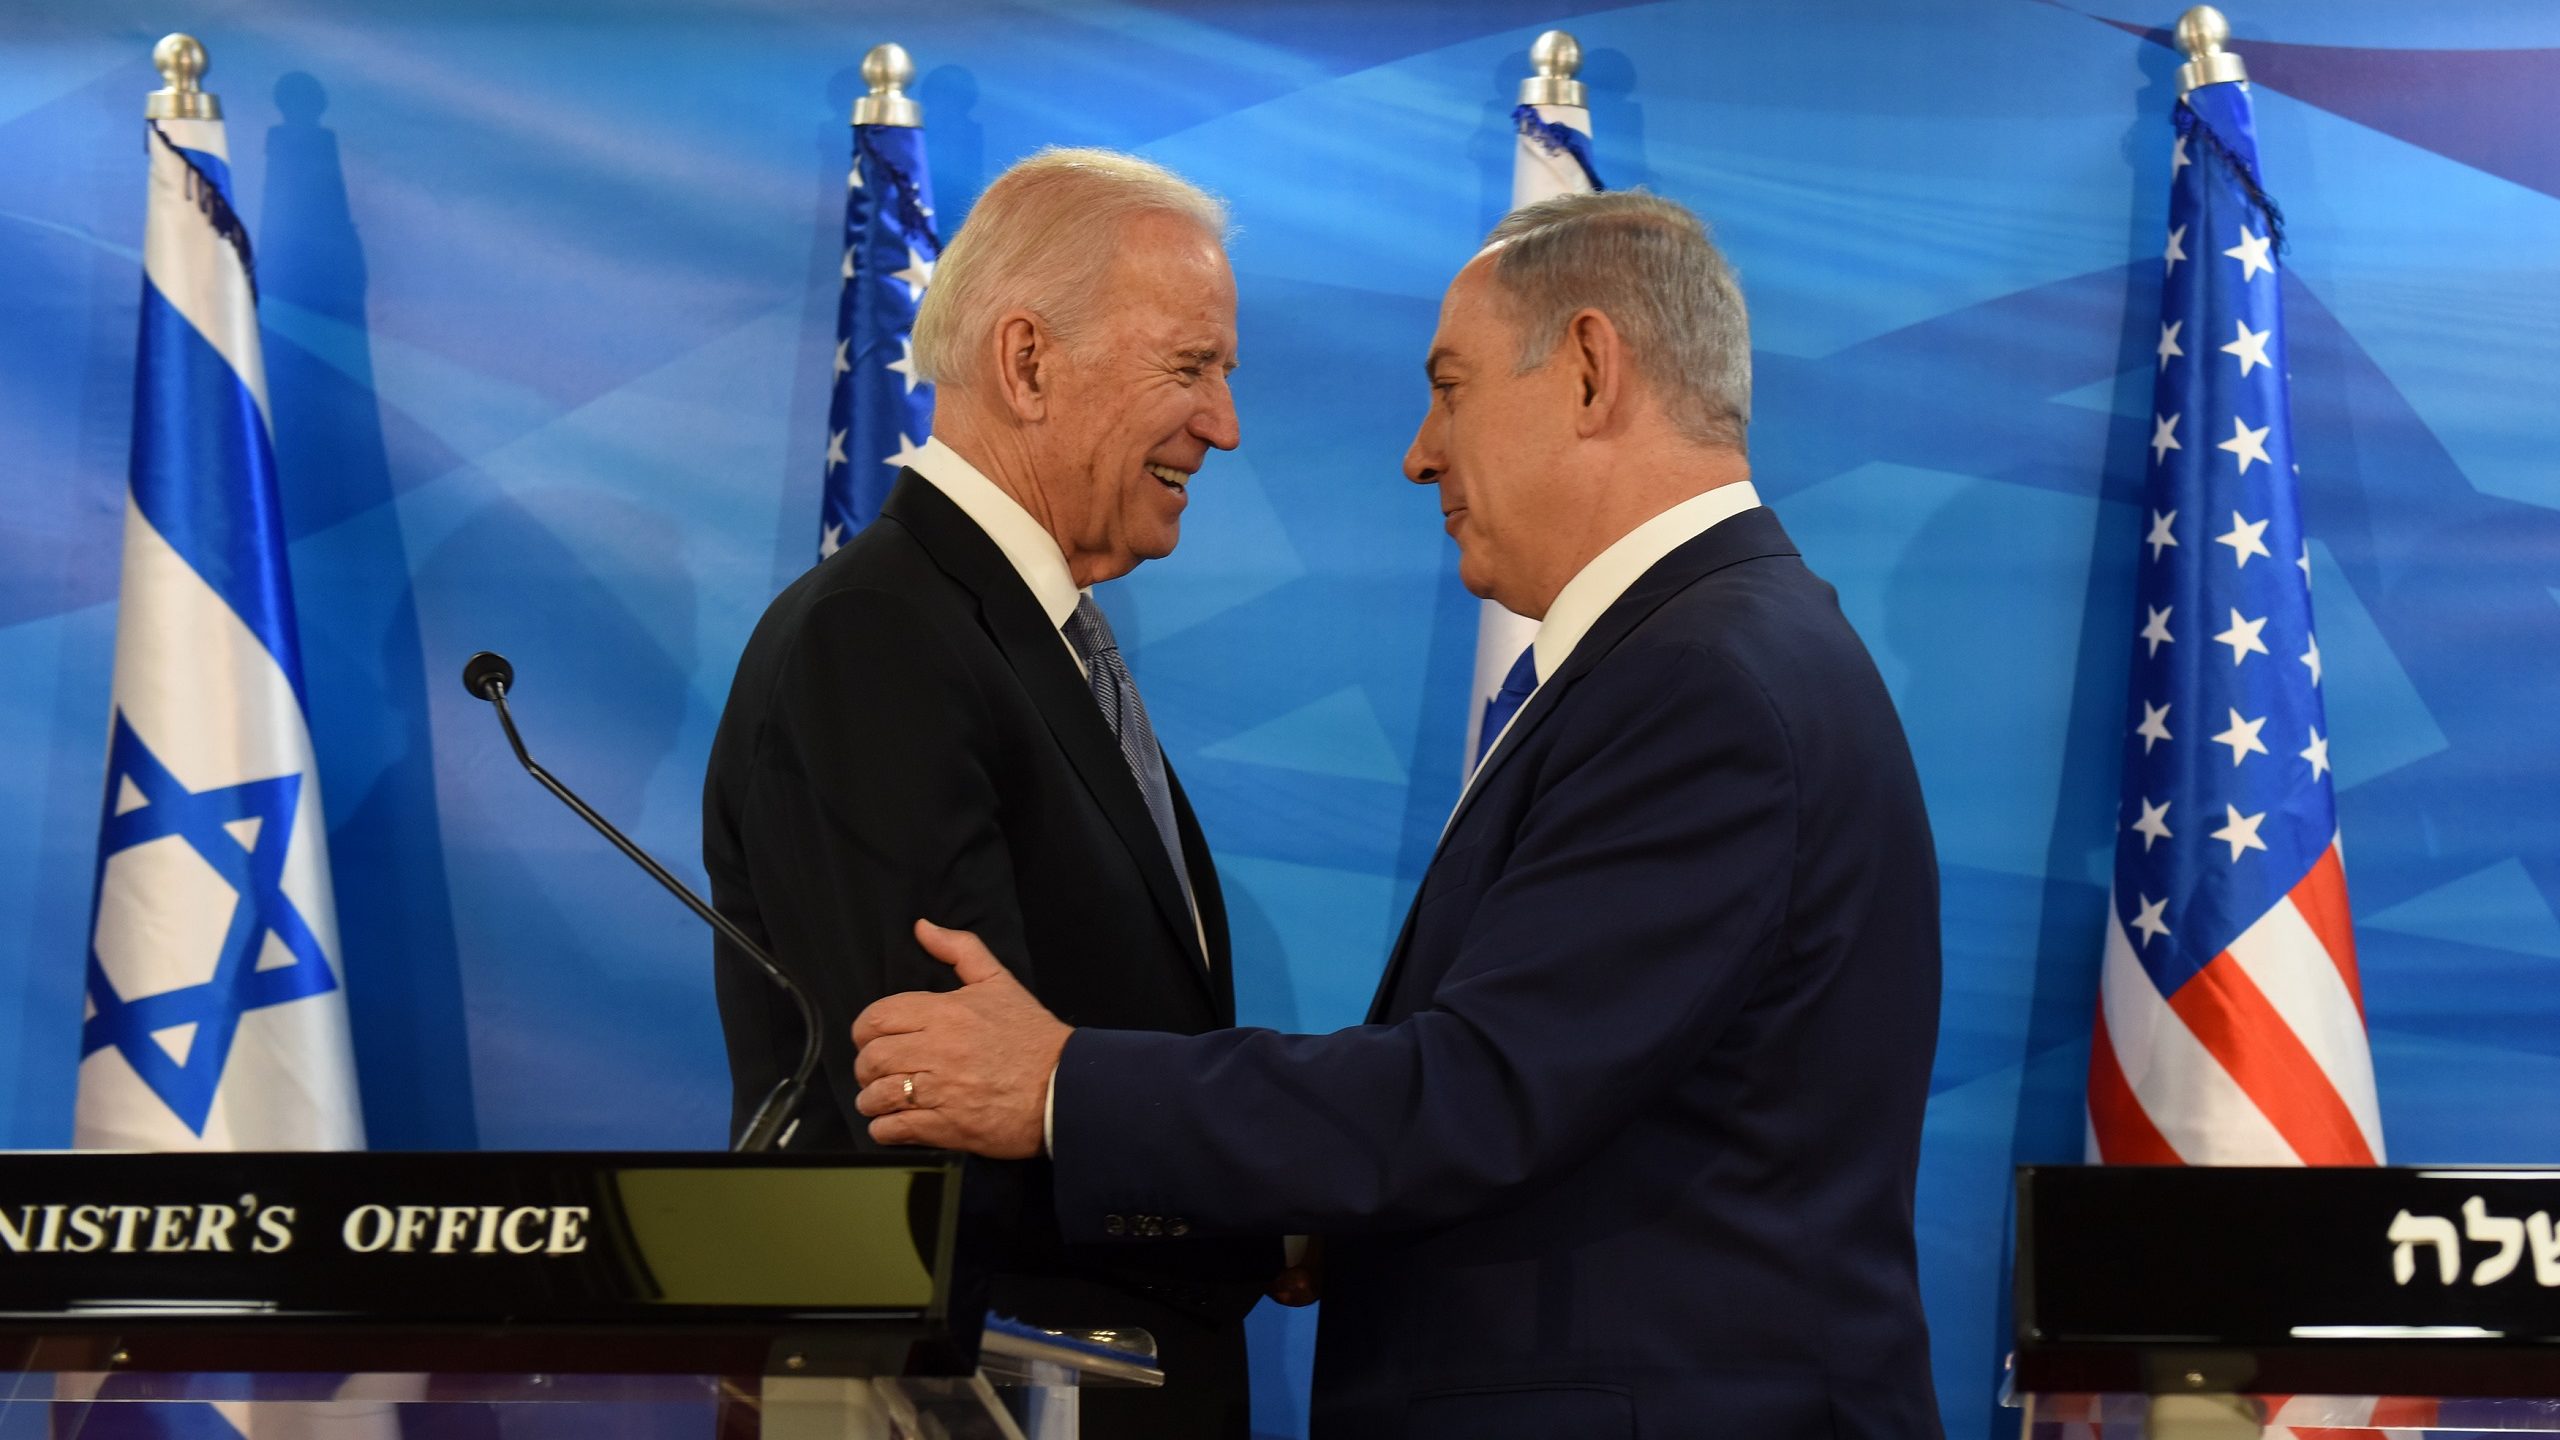 Netanyahu and Biden Finally Spoke, but the 2 Leaders May Be Far From Reaching Agreement